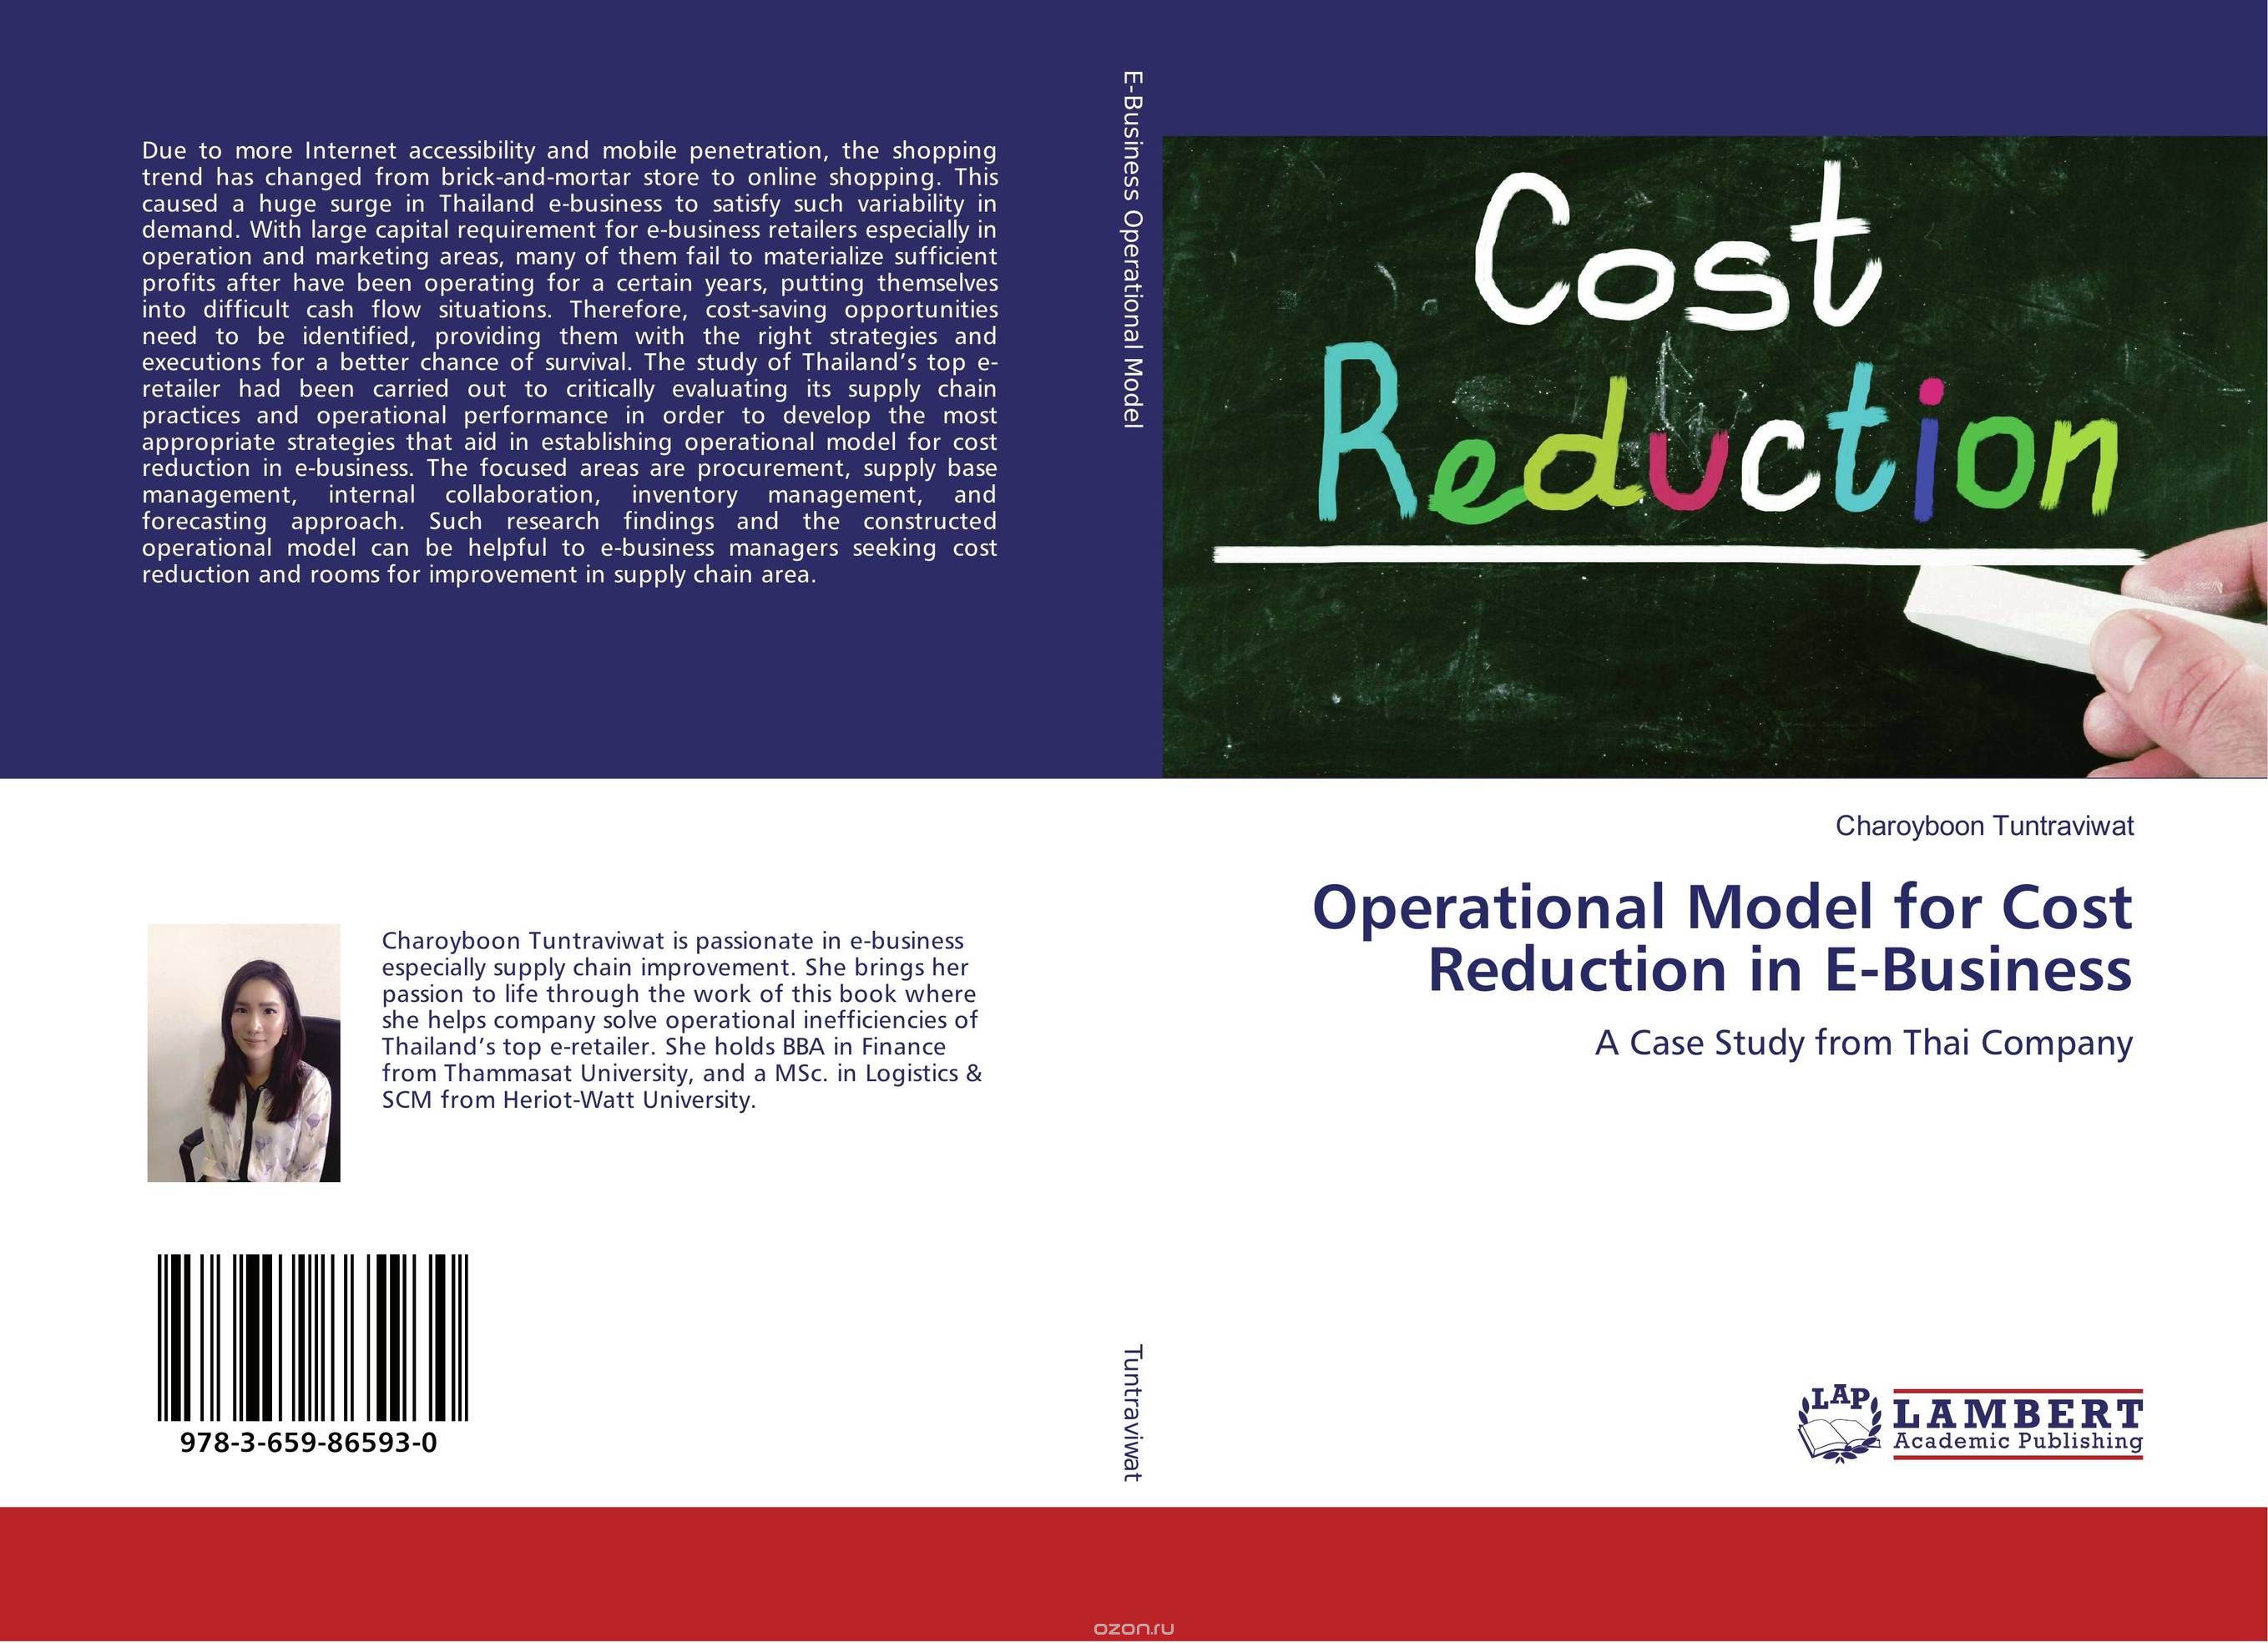 Скачать книгу "Operational Model for Cost Reduction in E-Business"